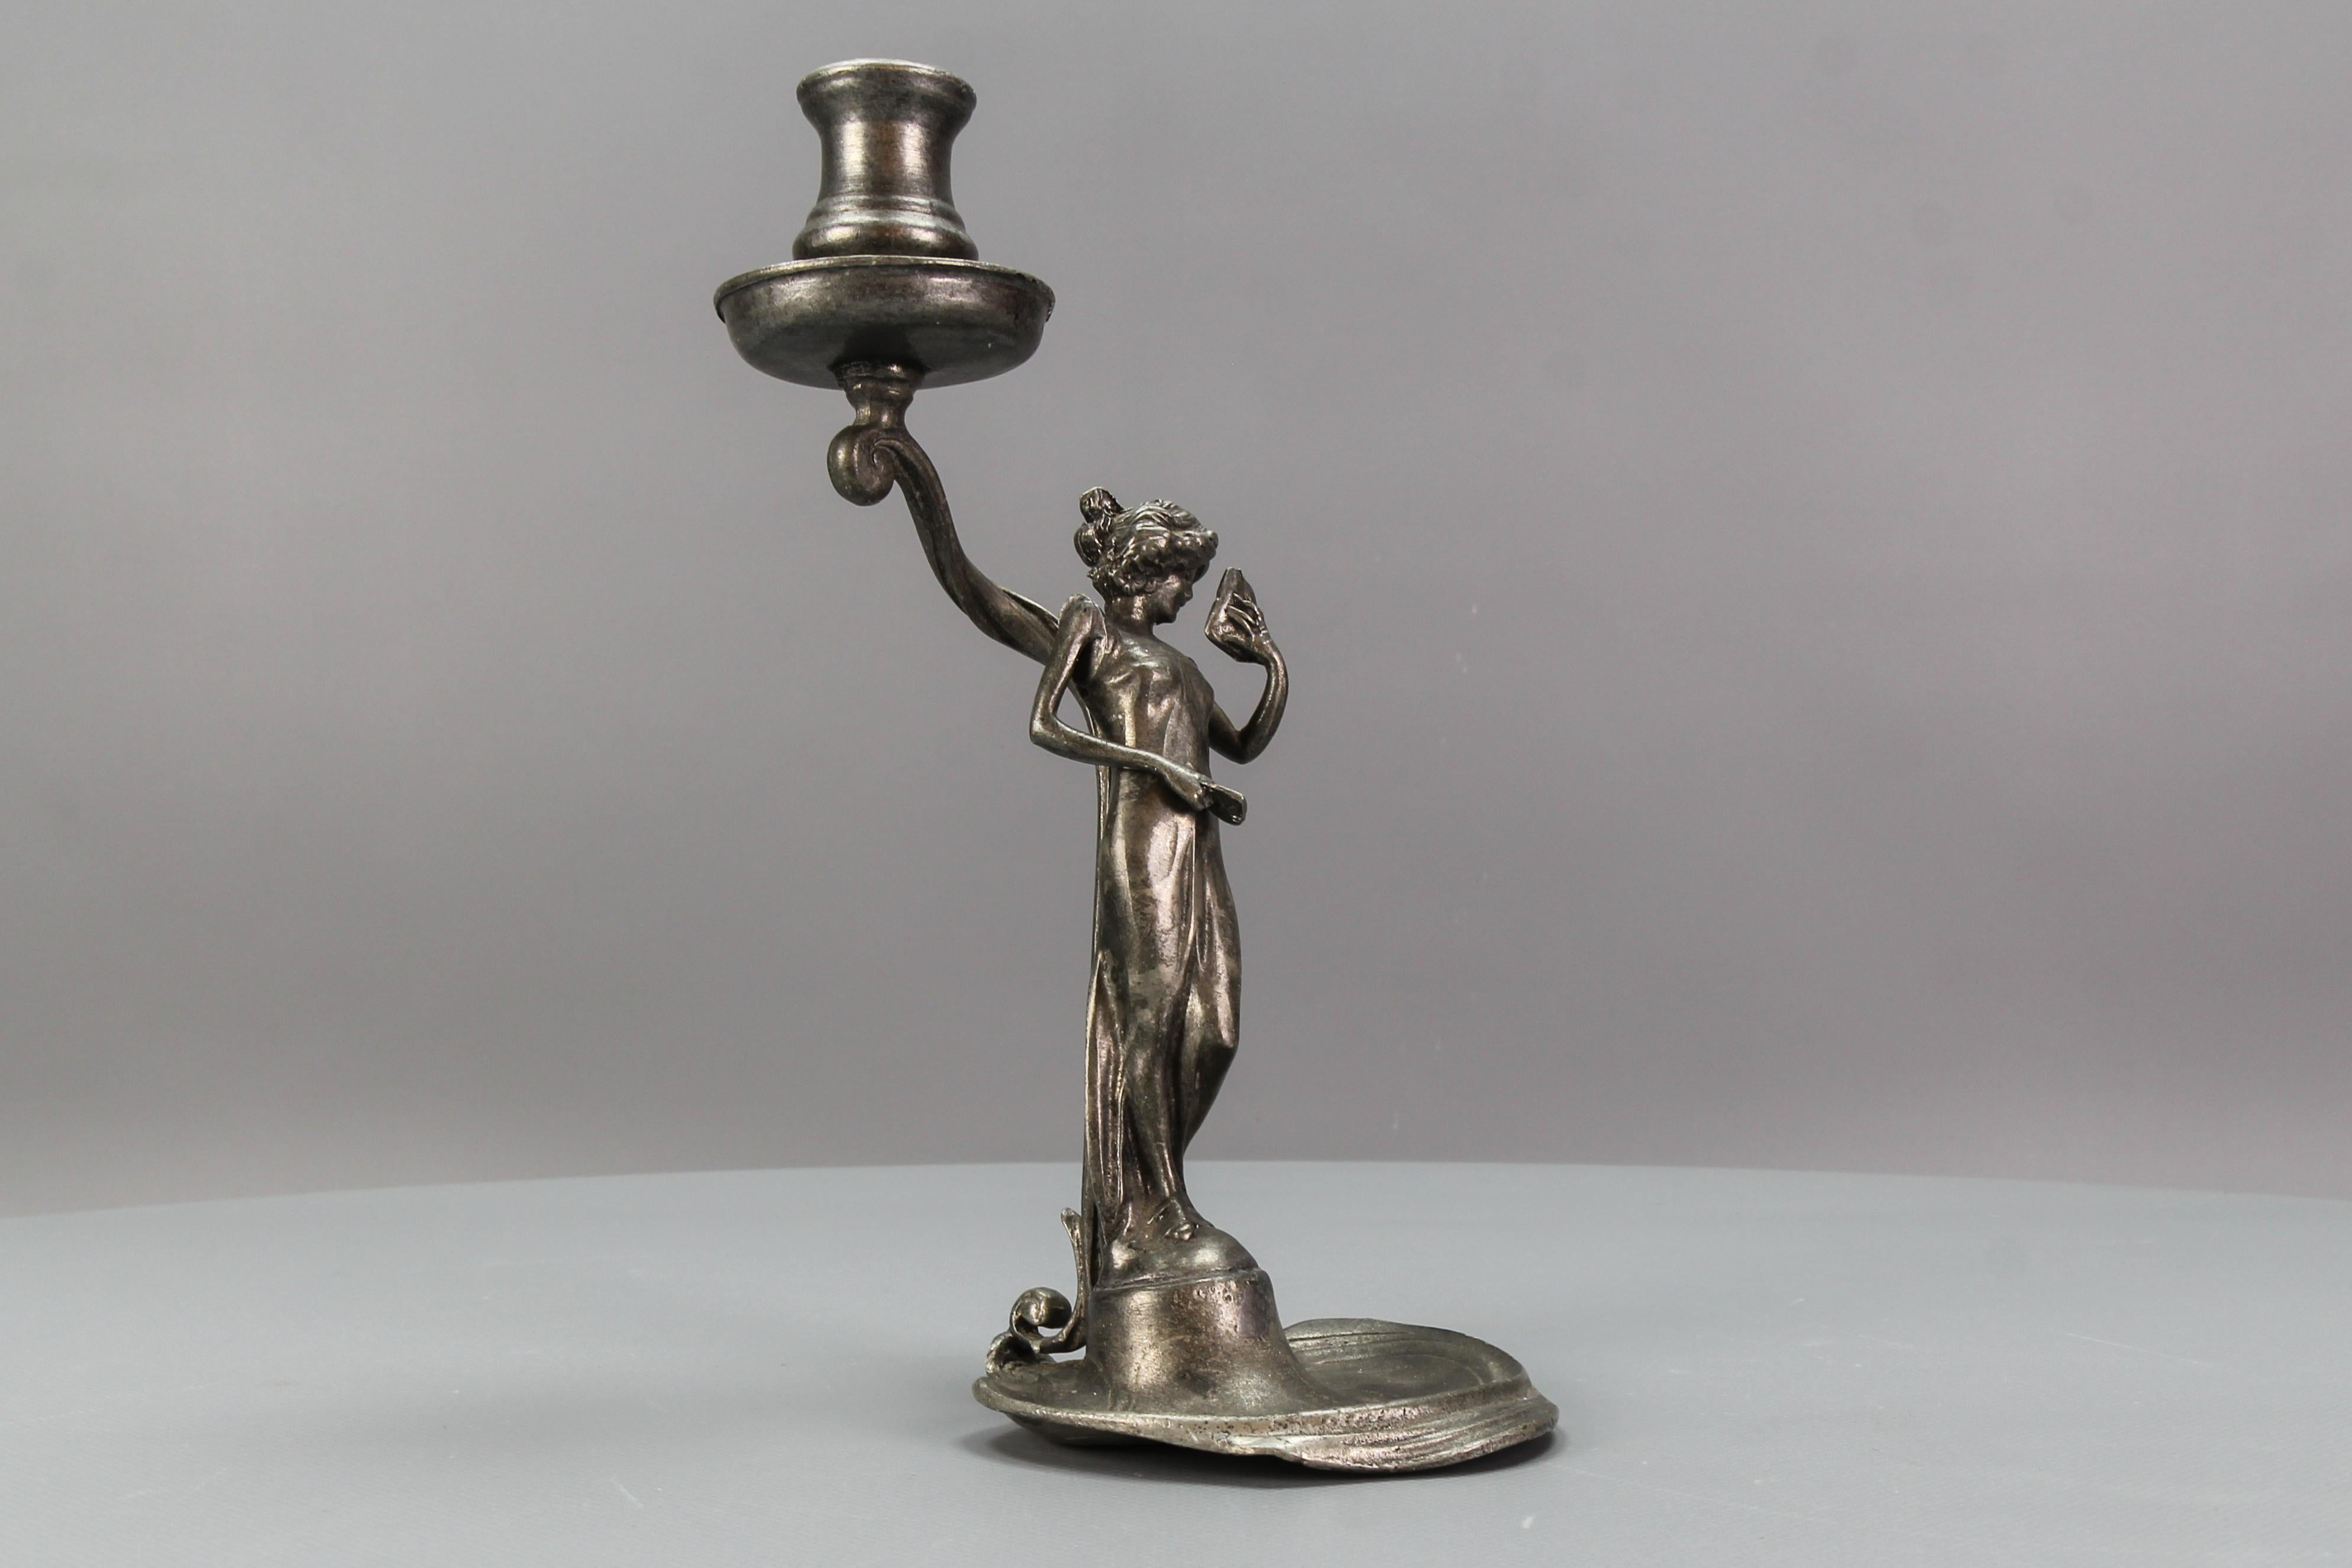 French Art Nouveau style pewter candlestick with a sculpture of a lady, from circa 1920.
An elegant Art Nouveau candle holder depicting a figure of a young and adorable lady, looking in a mirror that she is holding in one hand.
In good condition